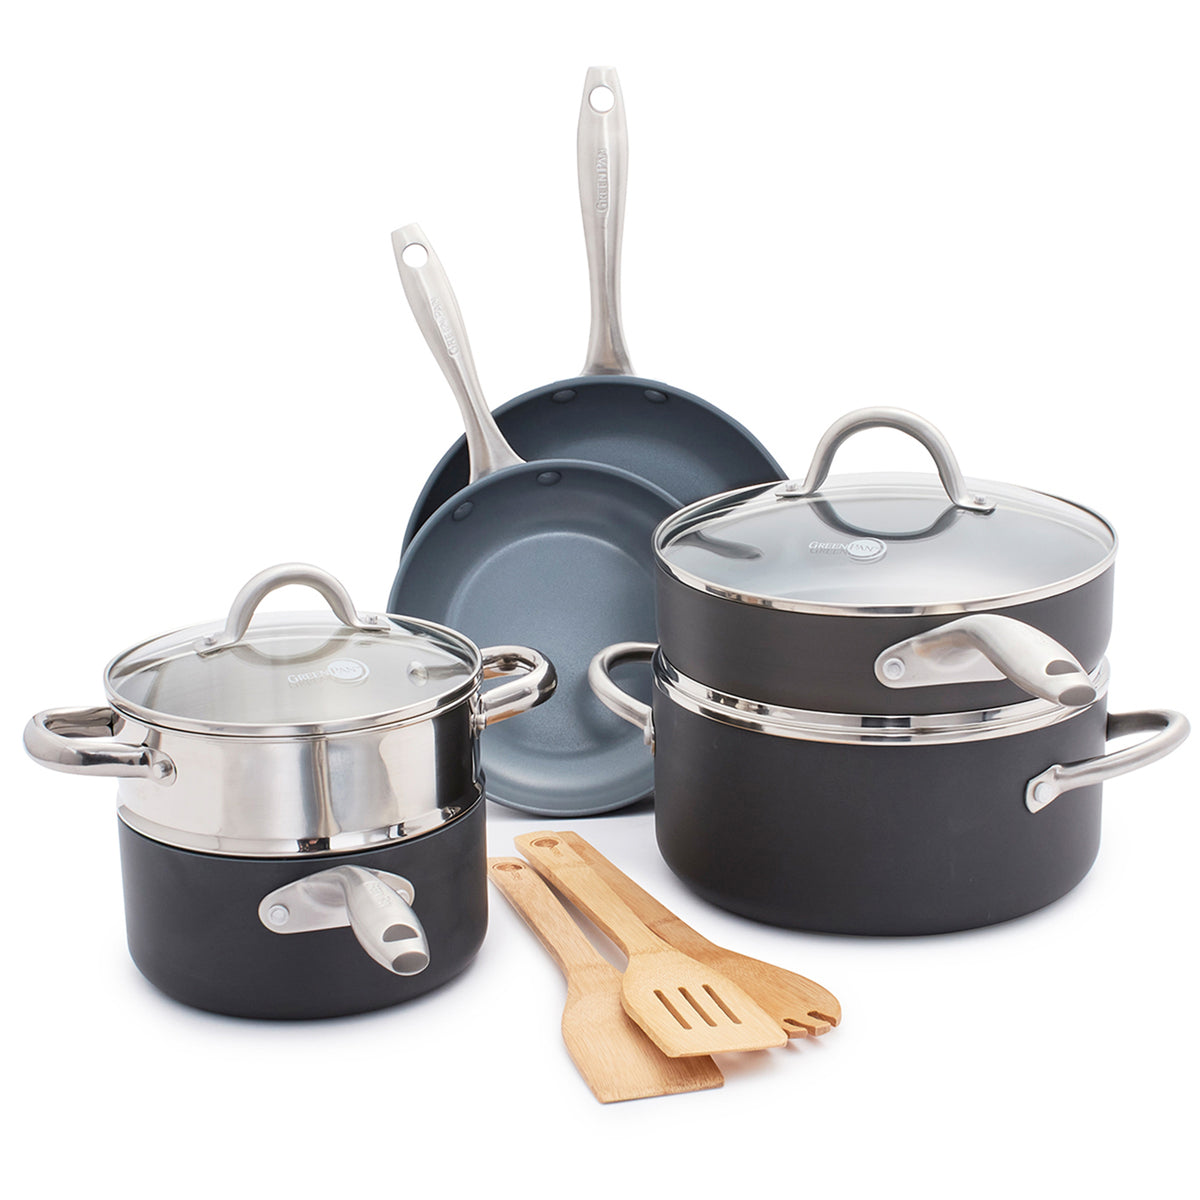 11 Best Non-Toxic Cookware Sets In 2023, According to Expert